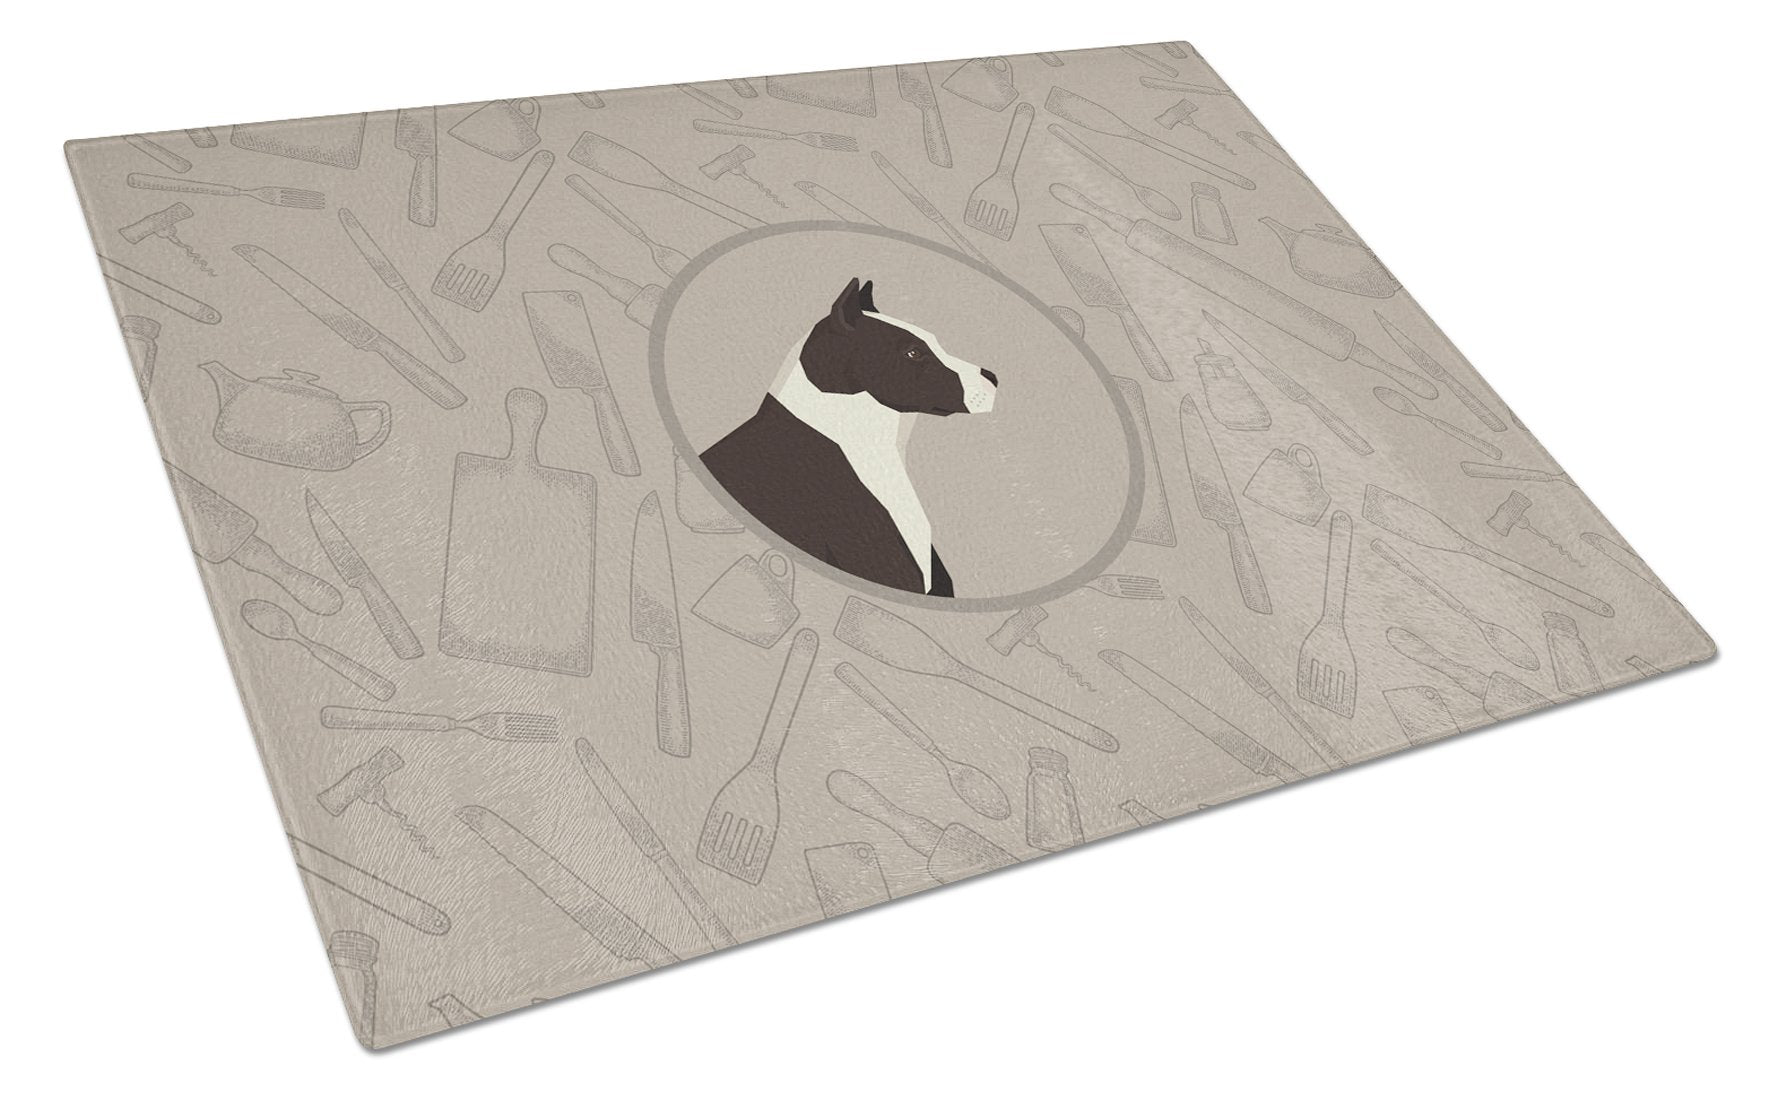 American Staffordshire Terrier In the Kitchen Glass Cutting Board Large CK2162LCB by Caroline's Treasures